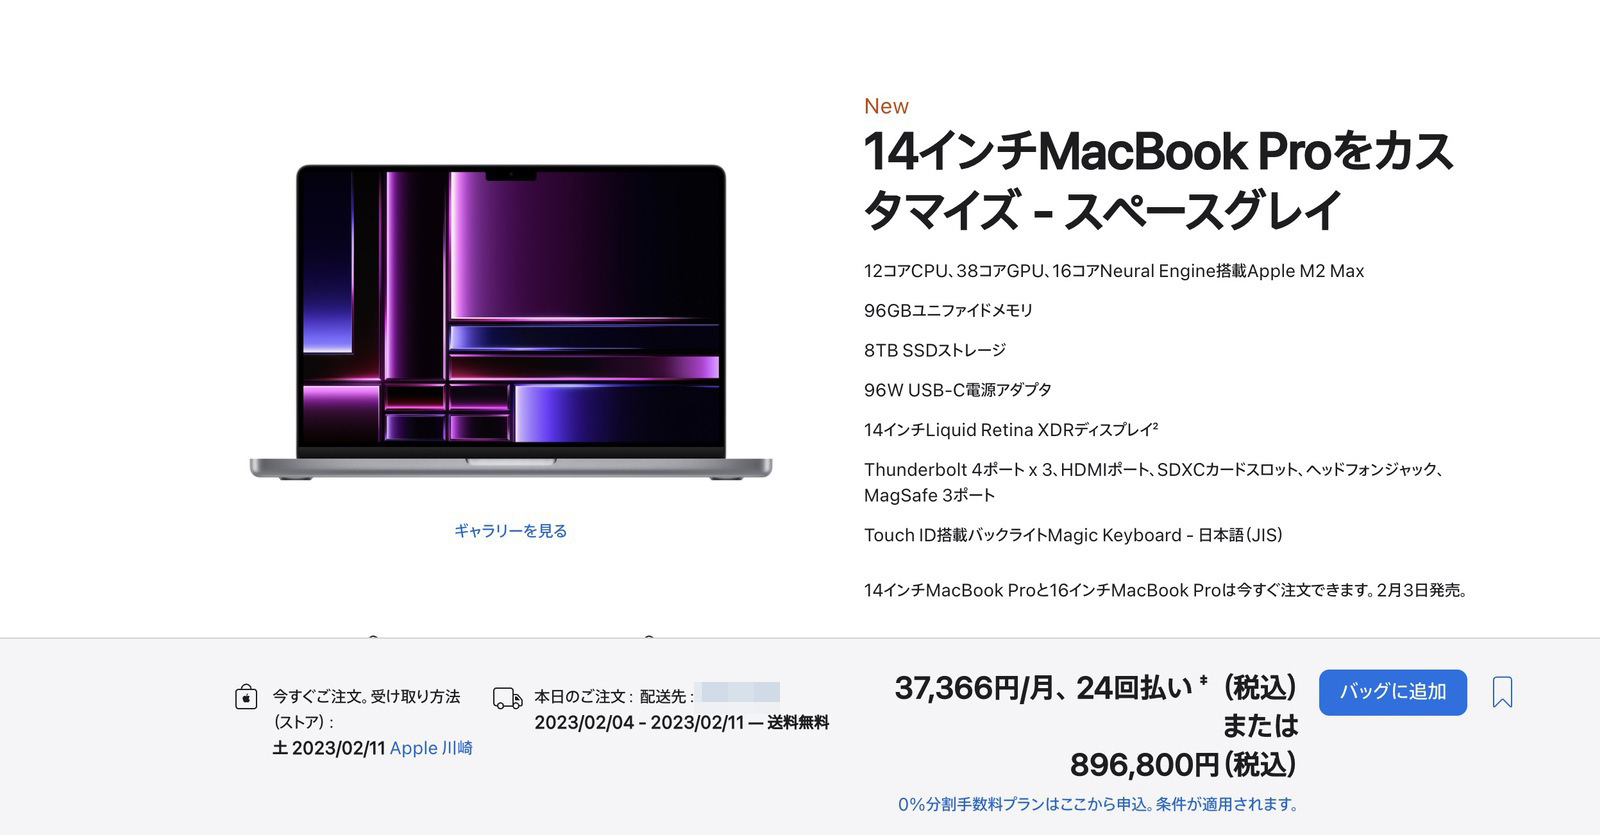 The Prices for MBP2022 at its highest 01 1